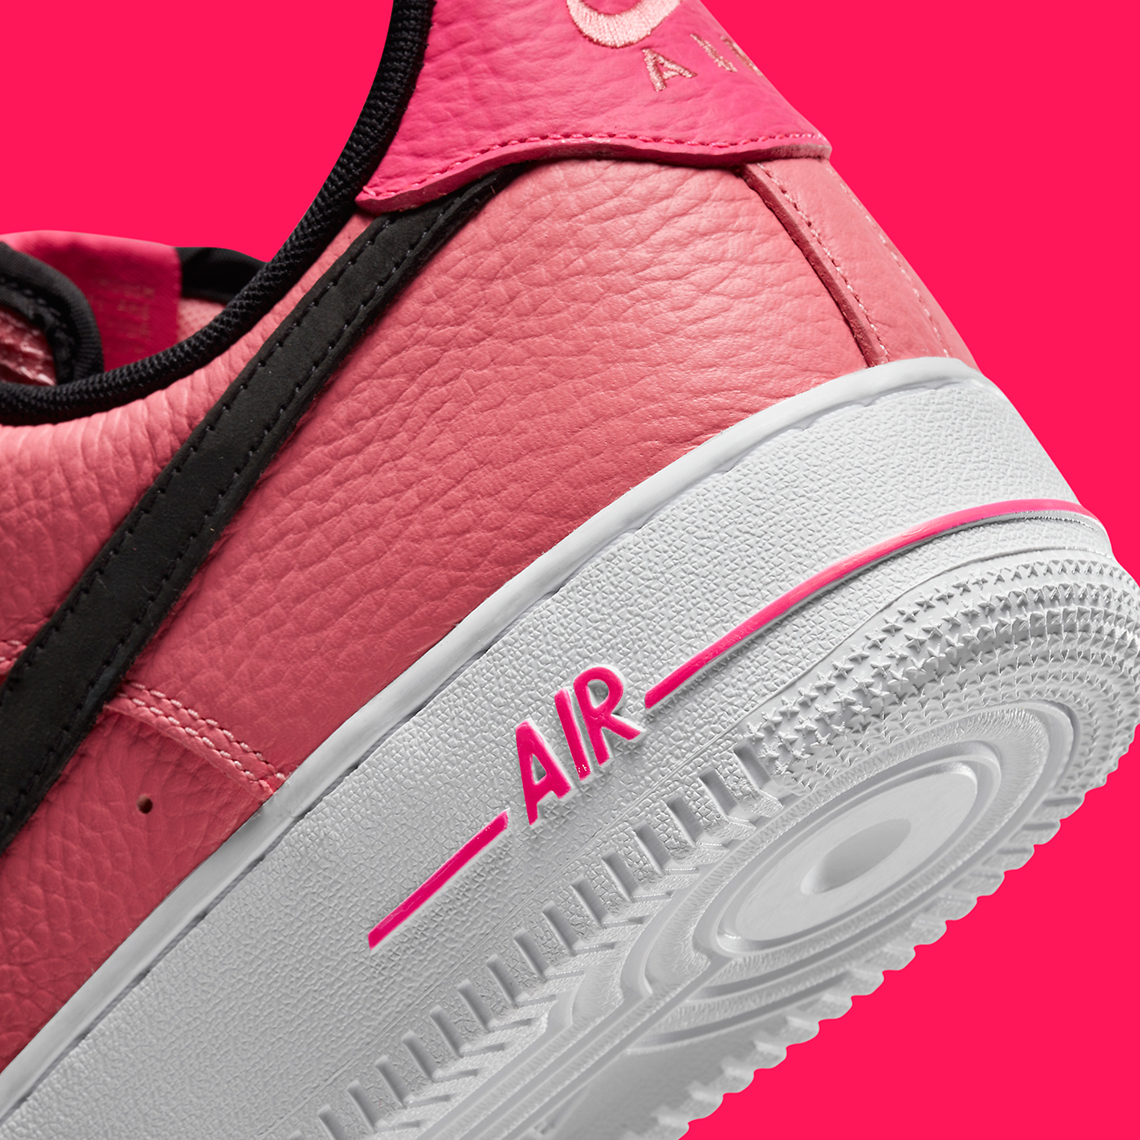 nike-air-force-1-low-pink-tumbled-leather-DZ4861-600-8.jpg